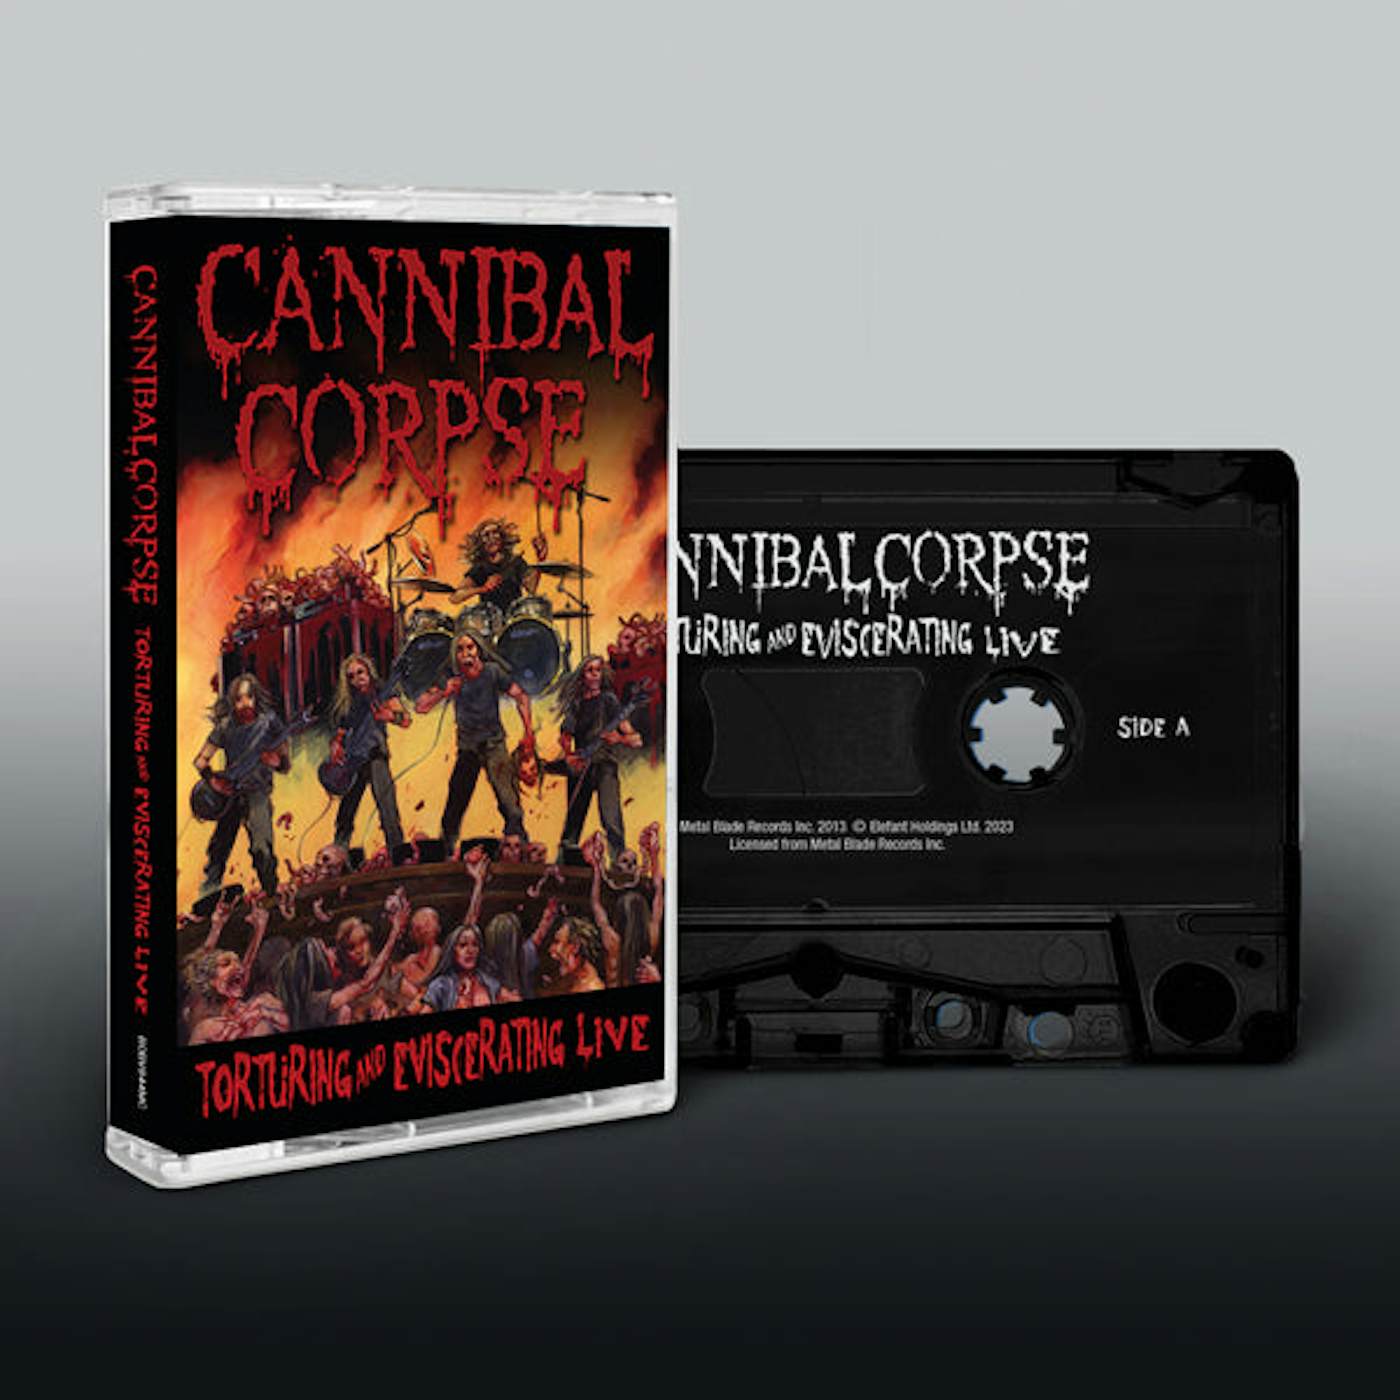 Cannibal Corpse Music Cassette - Torturing And Eviscerating Live